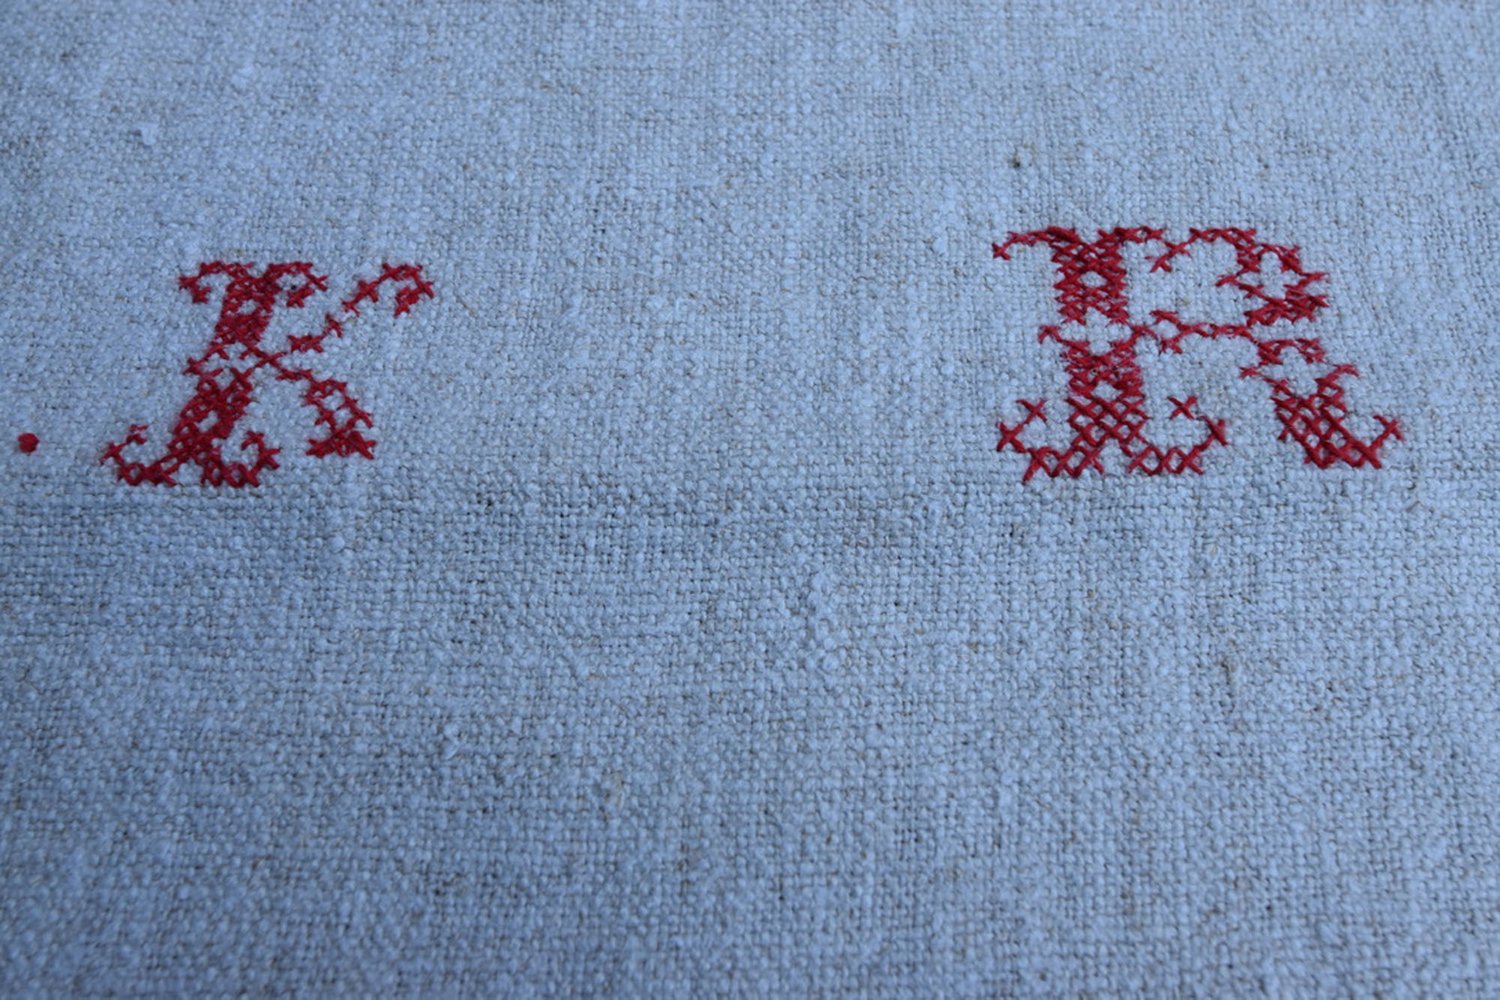 Hand-Embroidered Monograms